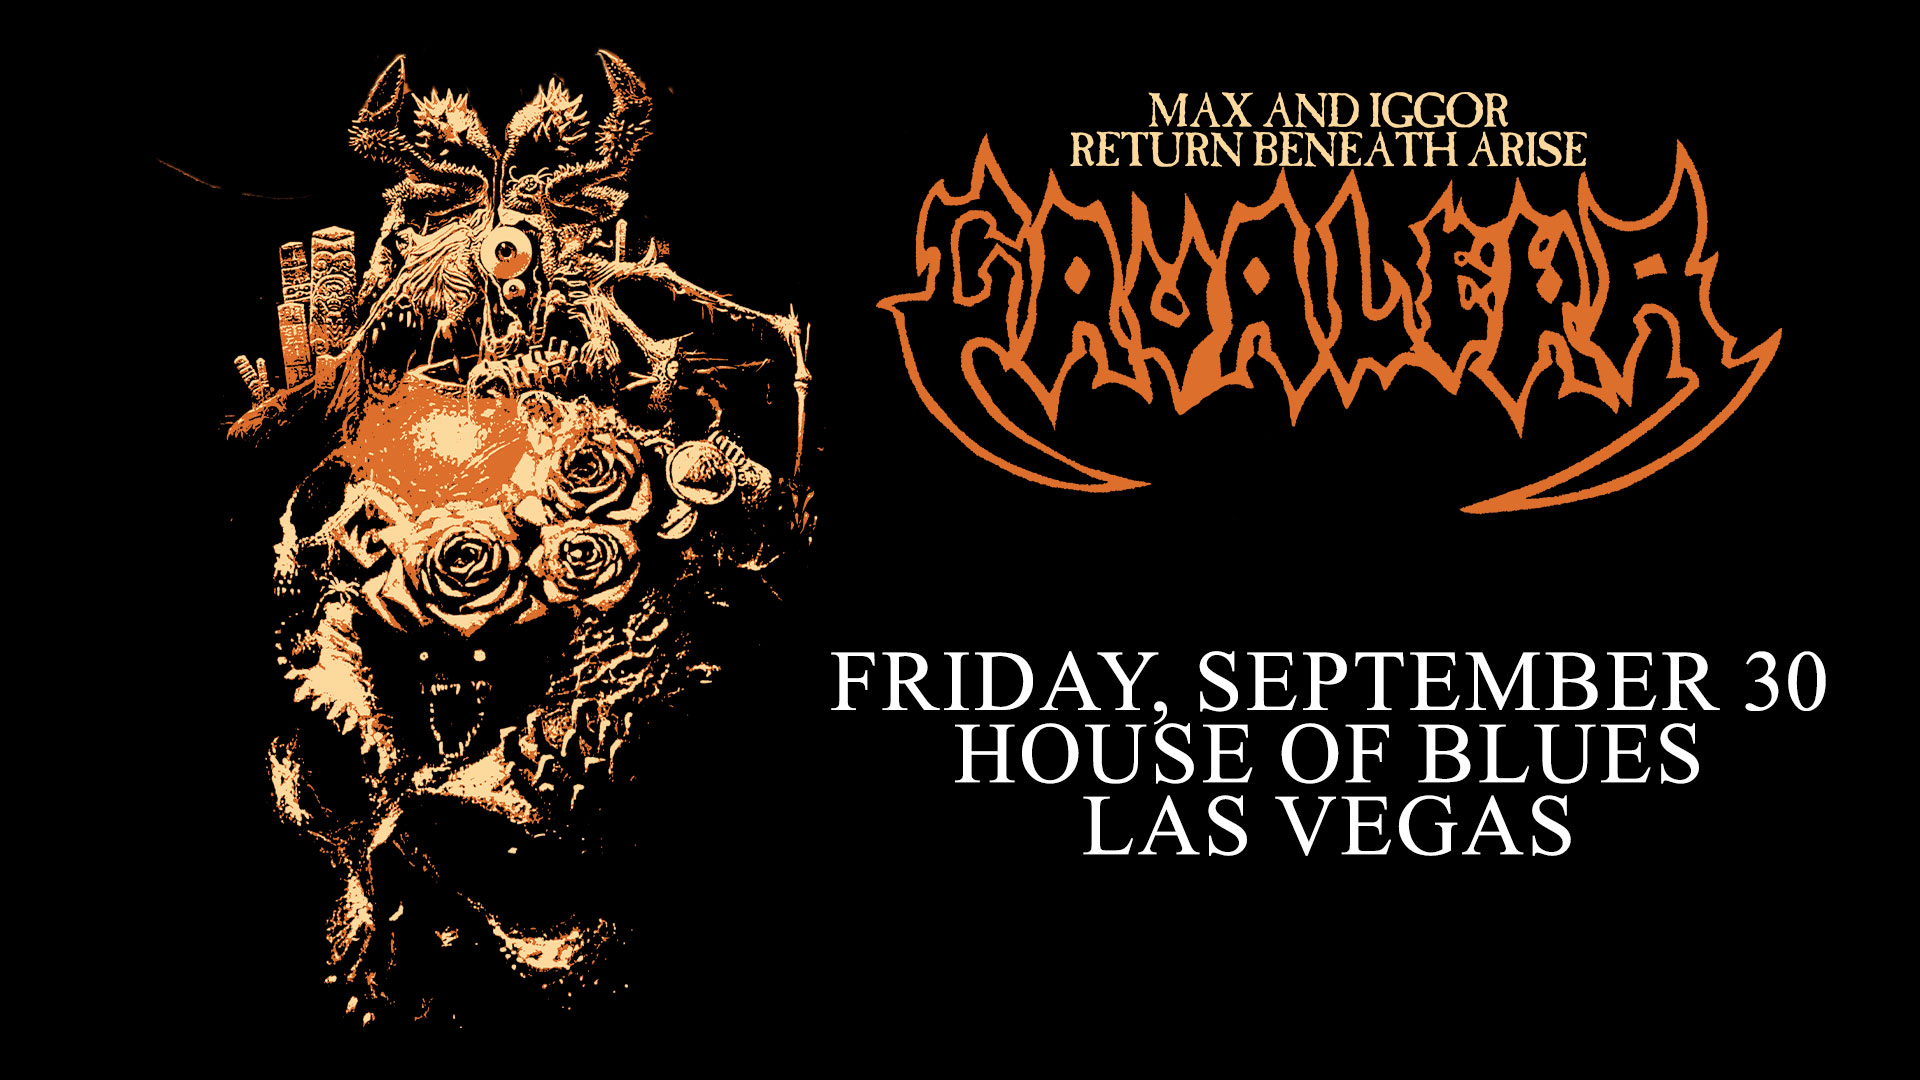 CONTEST TIME!  SEE MAX AND IGGOR CAVALERA AT HOUSE OF BLUES ON FRIDAY!